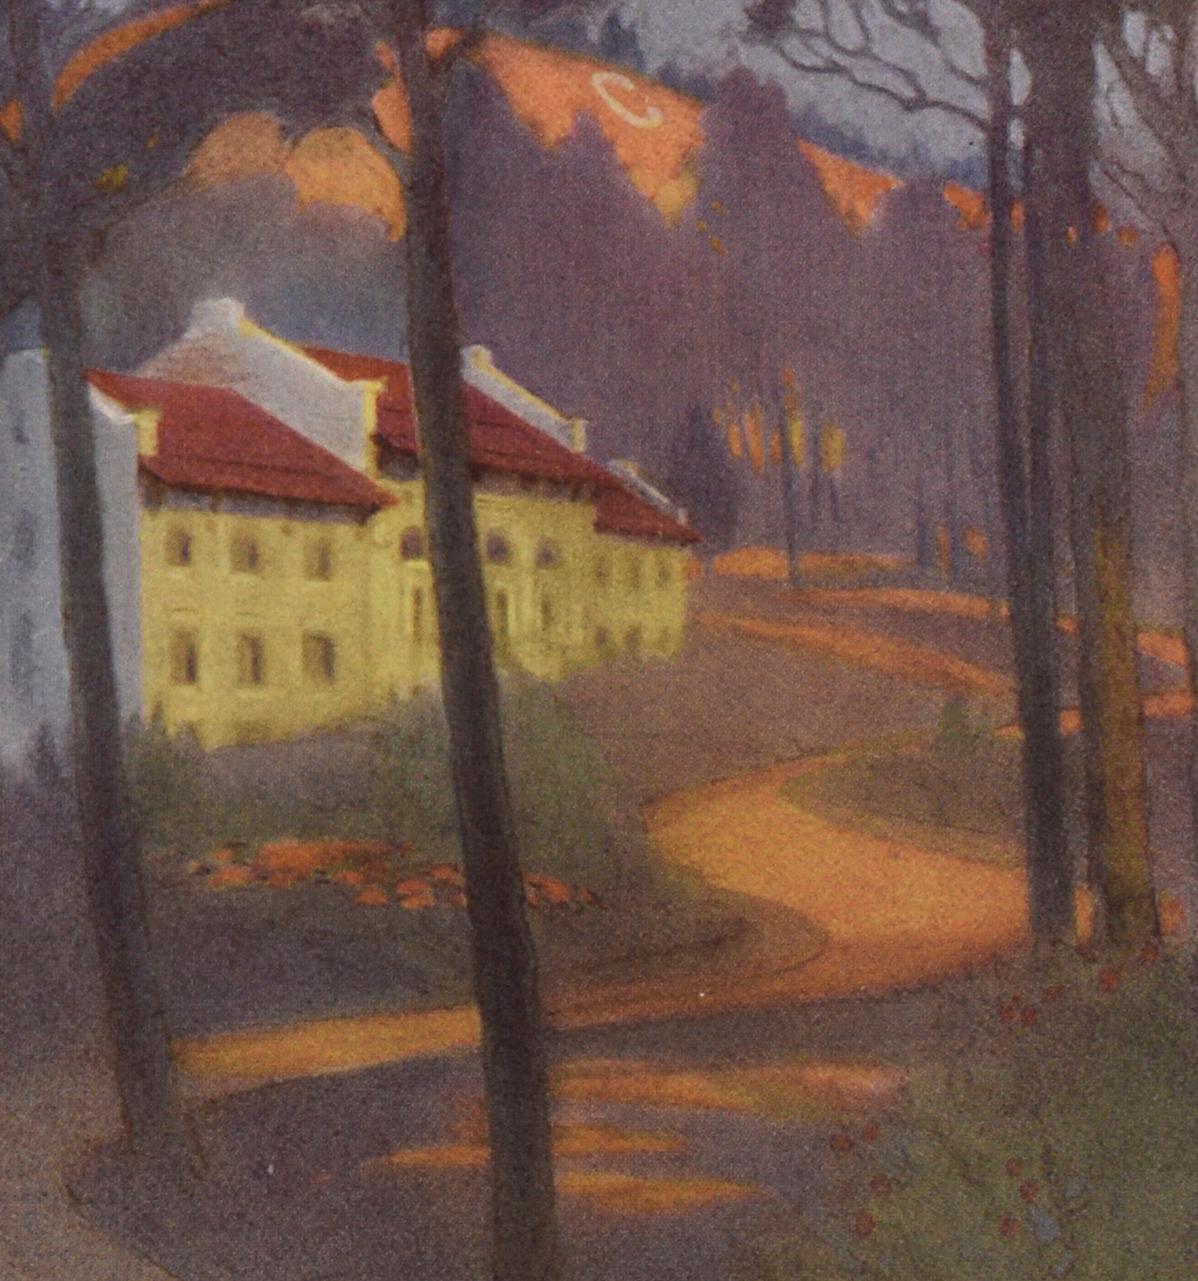 „The Mining Building From The Road“ - 1921 UC Berkeley Jahrebuch Farblithographie „The Mining Building From The Road“ (Amerikanischer Impressionismus), Print, von Pedro Lemos